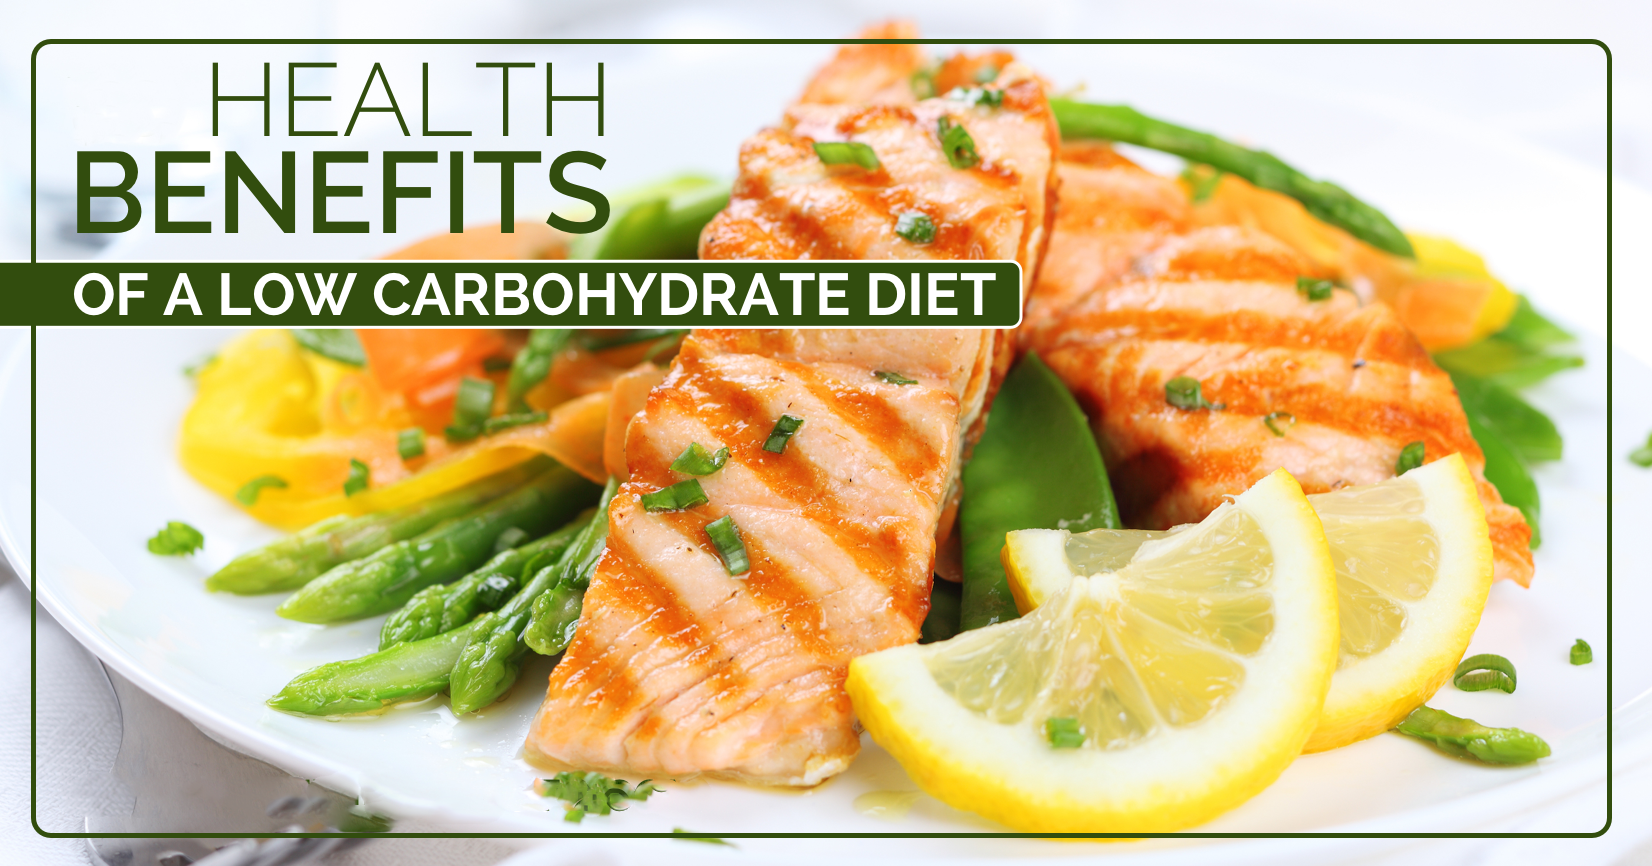 HEALTH-BENEFITS-OF-LOW-CARBOHYDRATE-DIET